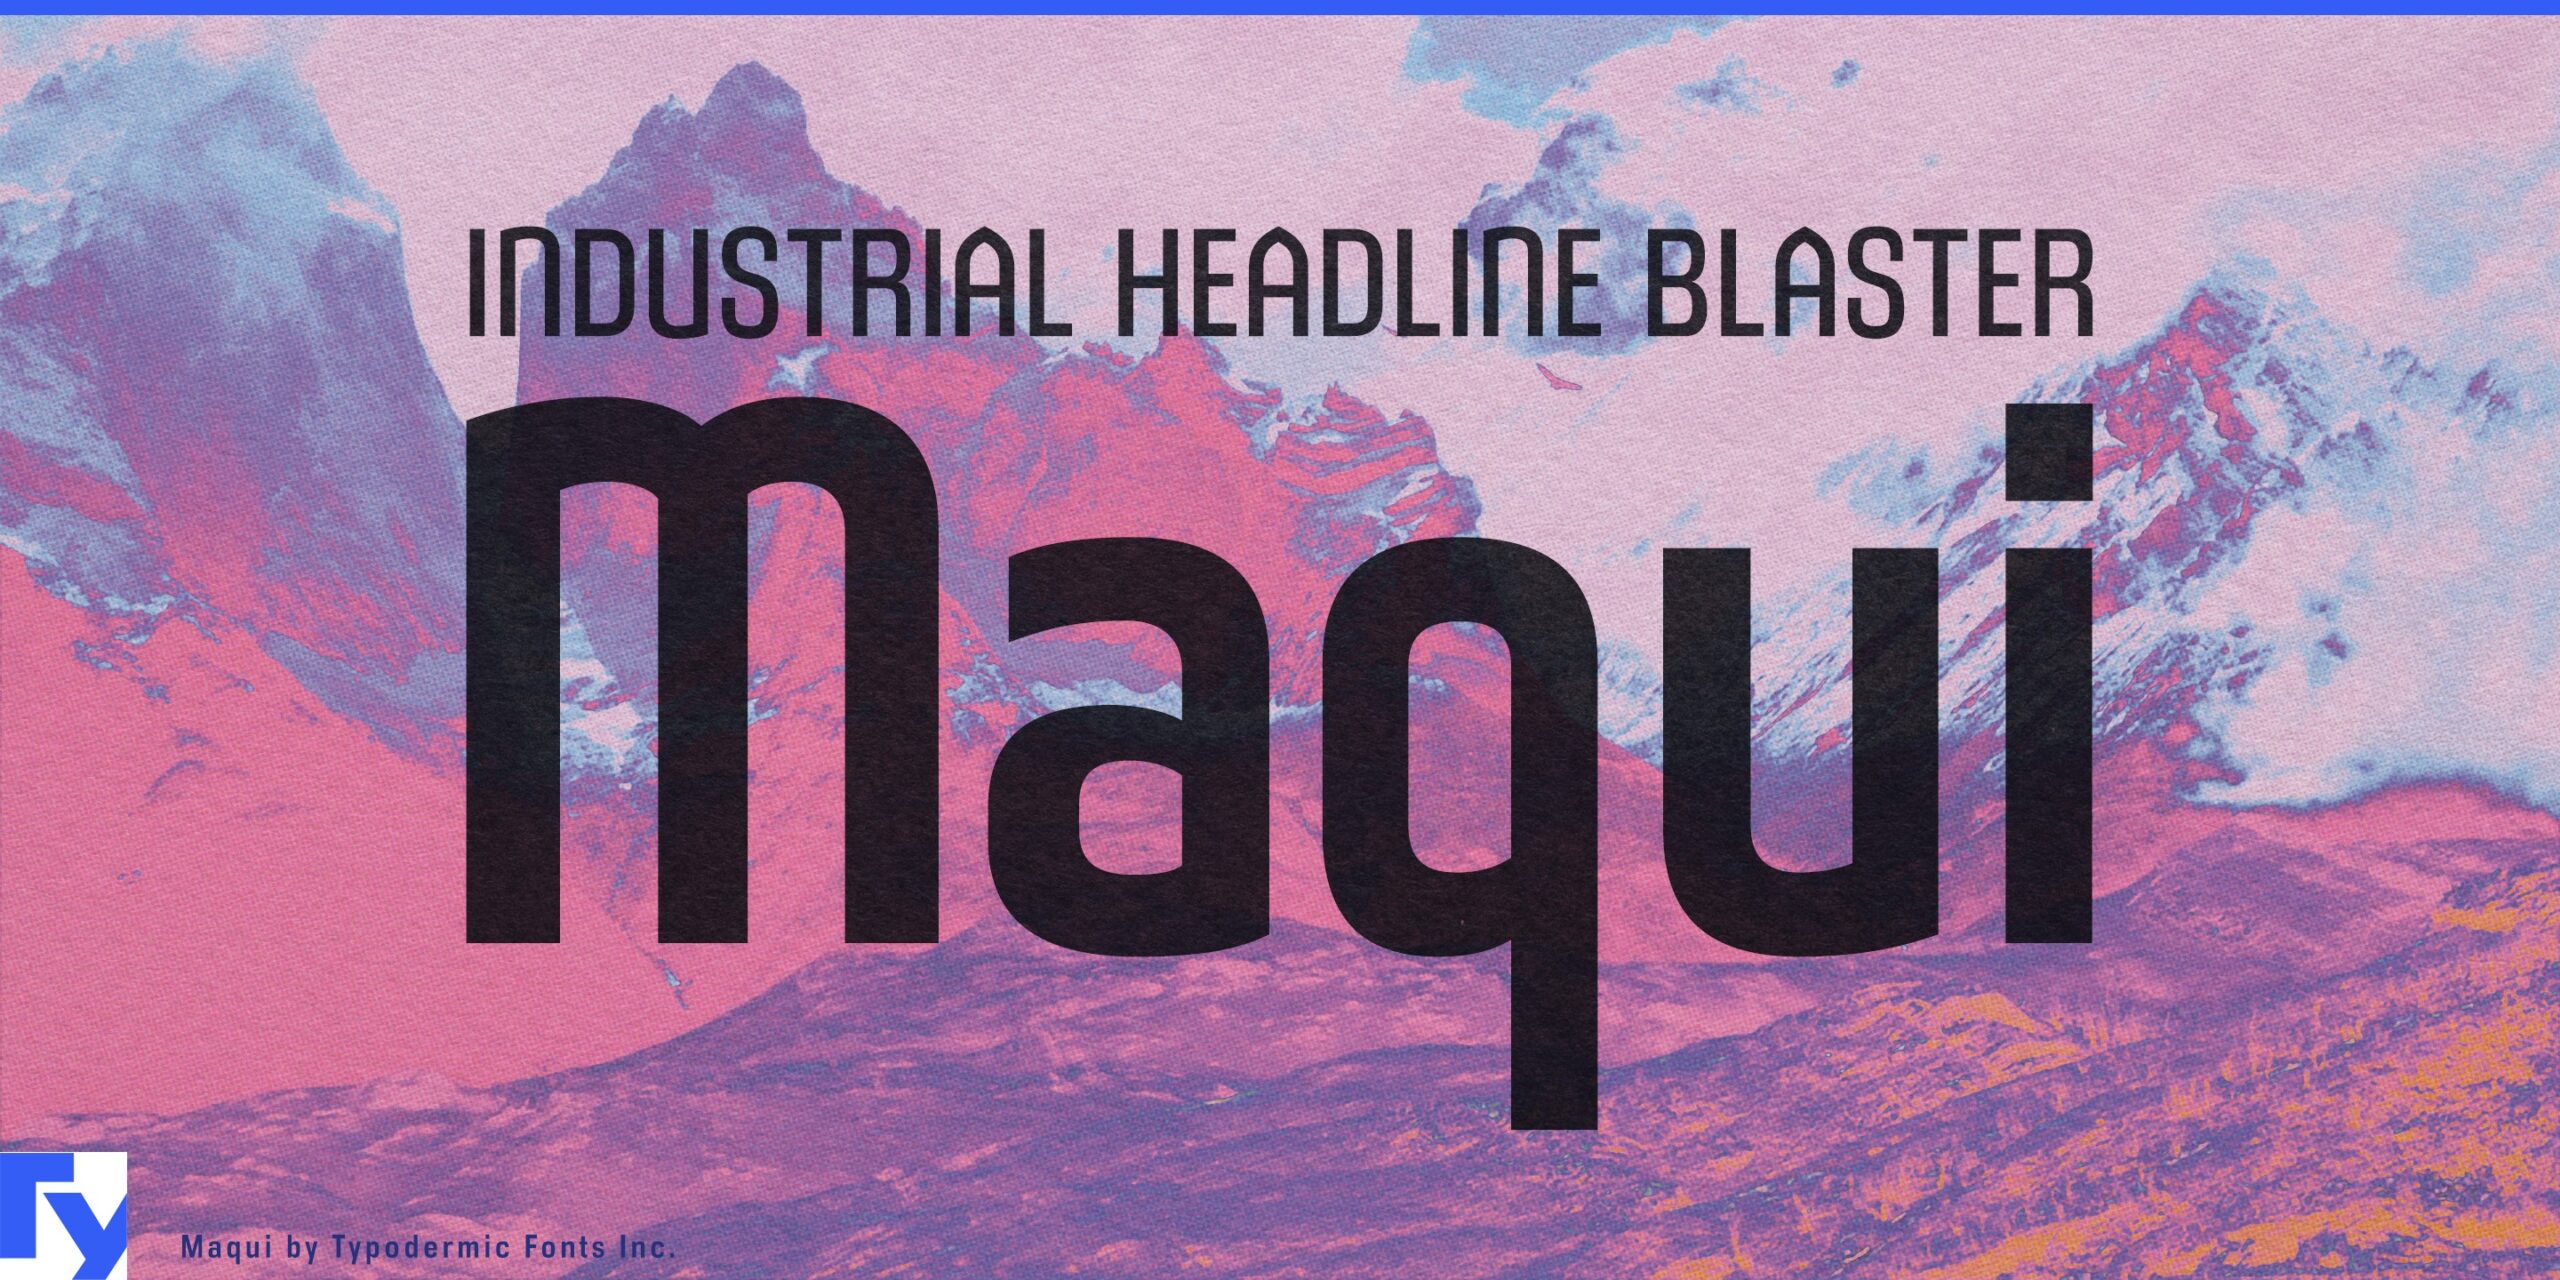 Delicate and Delightful: Maqui Typeface for Subtle Text